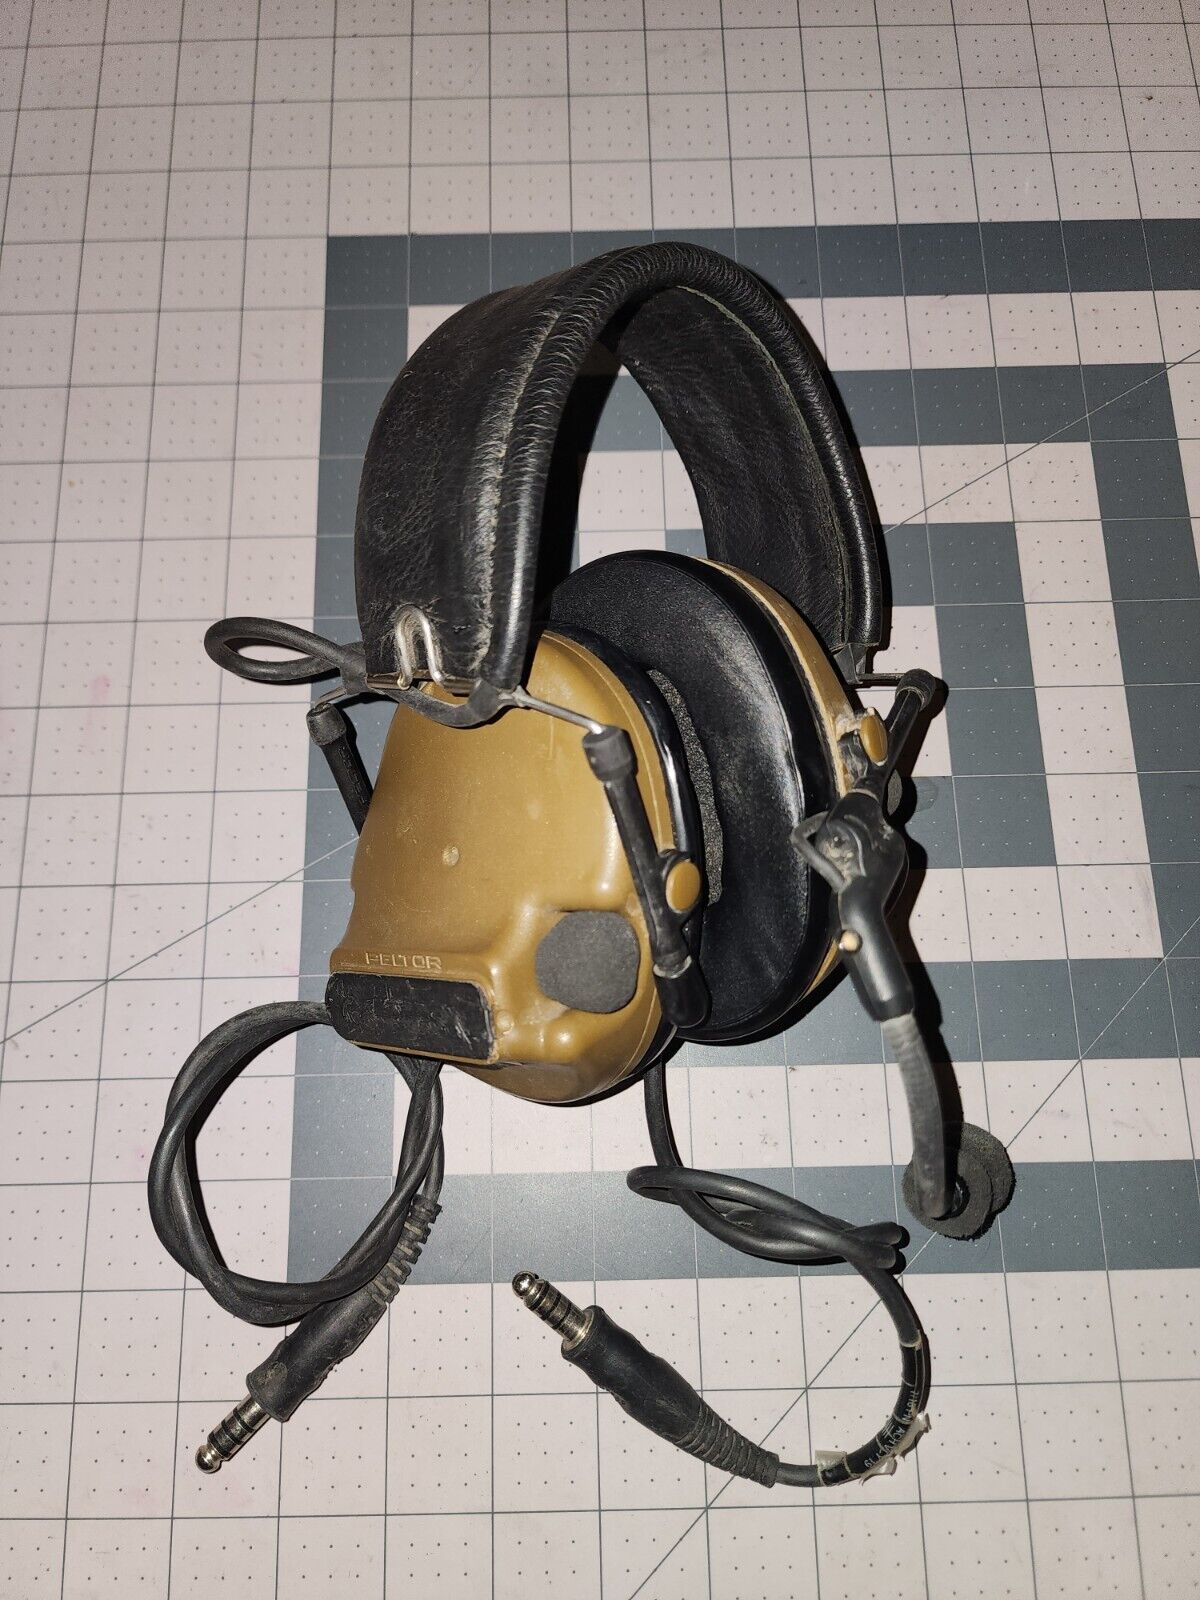 3M PELTOR Comtac ACH Dual Communication Headset 88079 Mic Tested/Works - Used